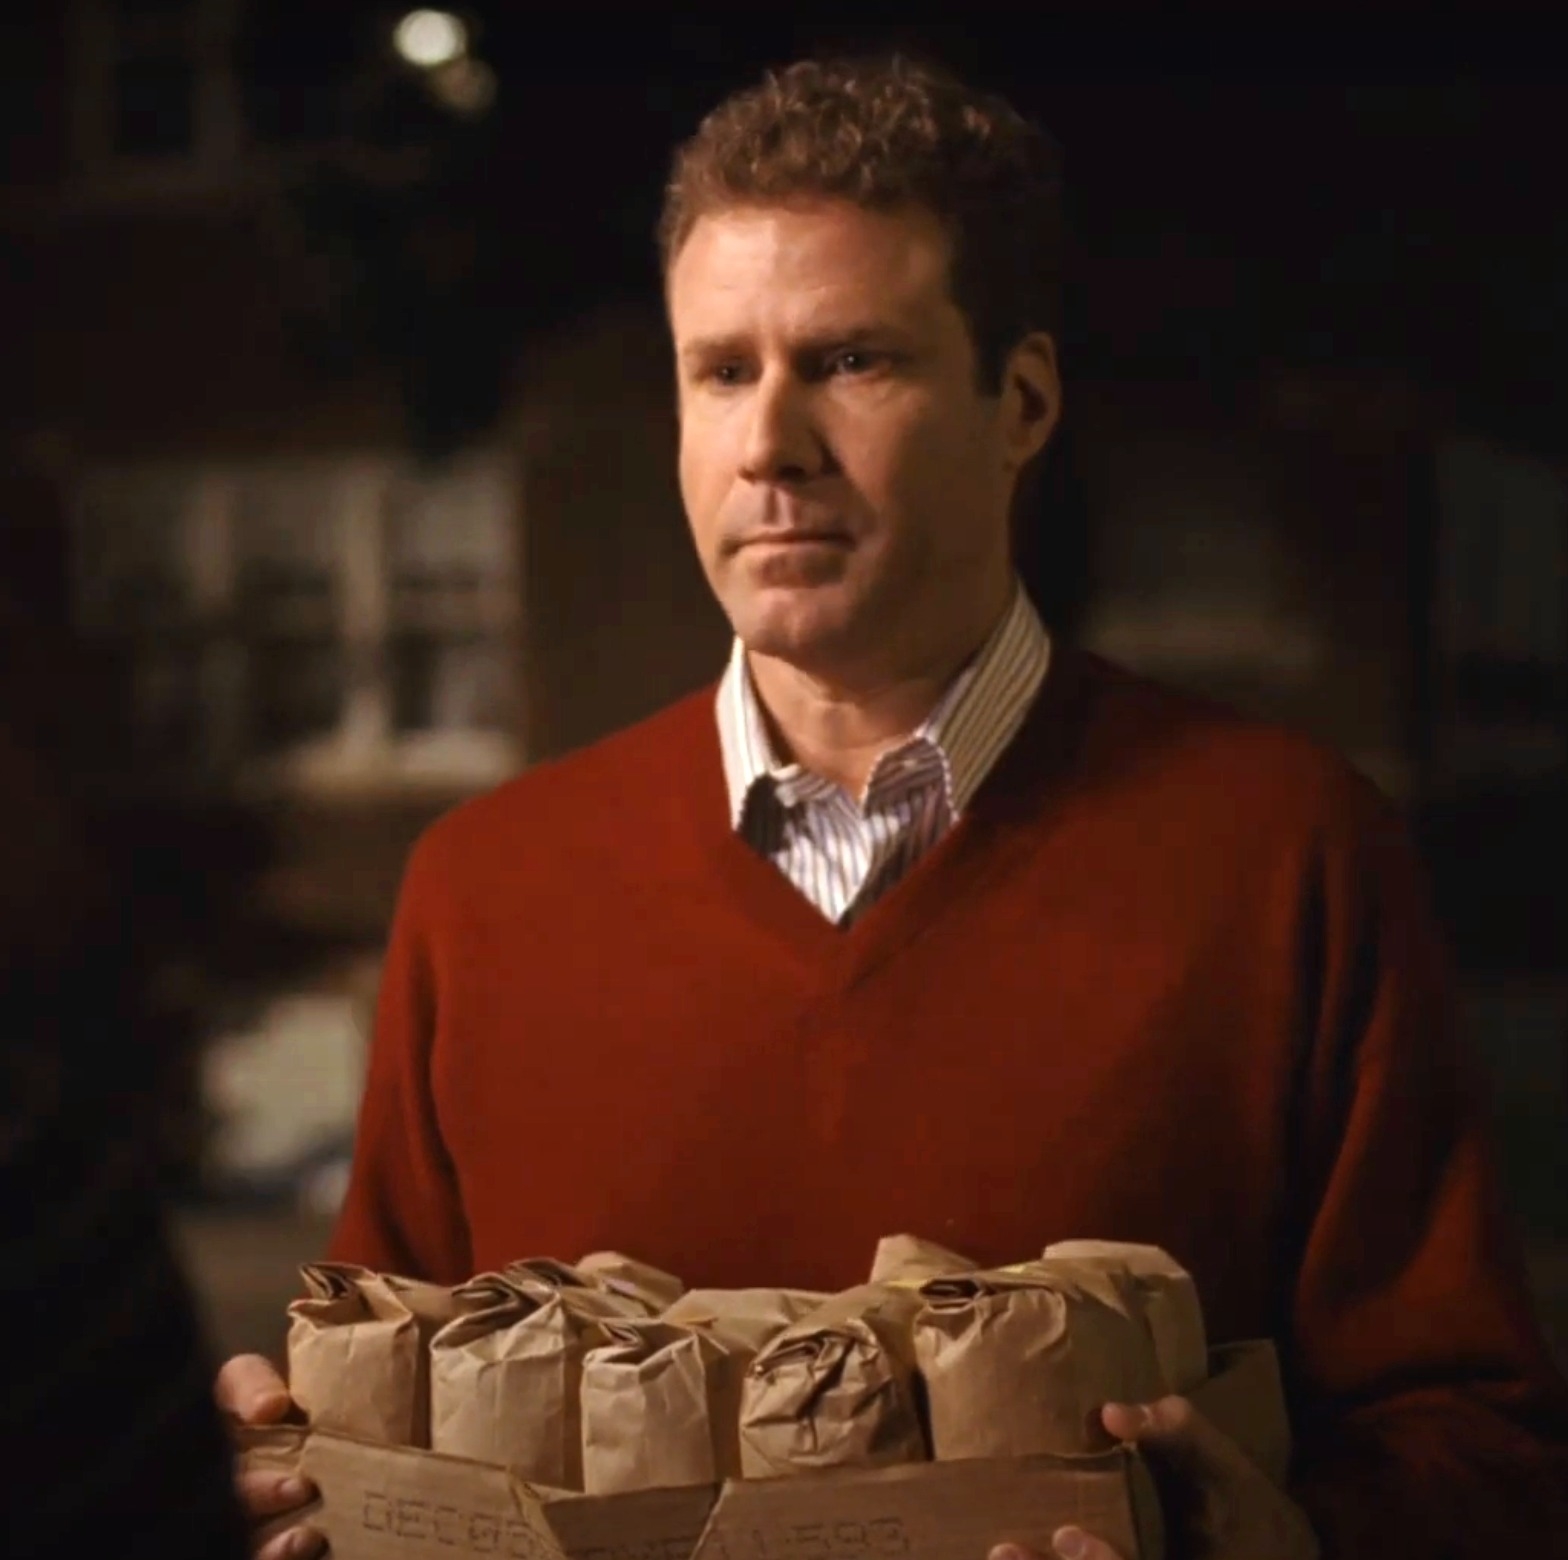 Will Ferrell holding a cardboard 6-pack carrier with paper-wrapped items